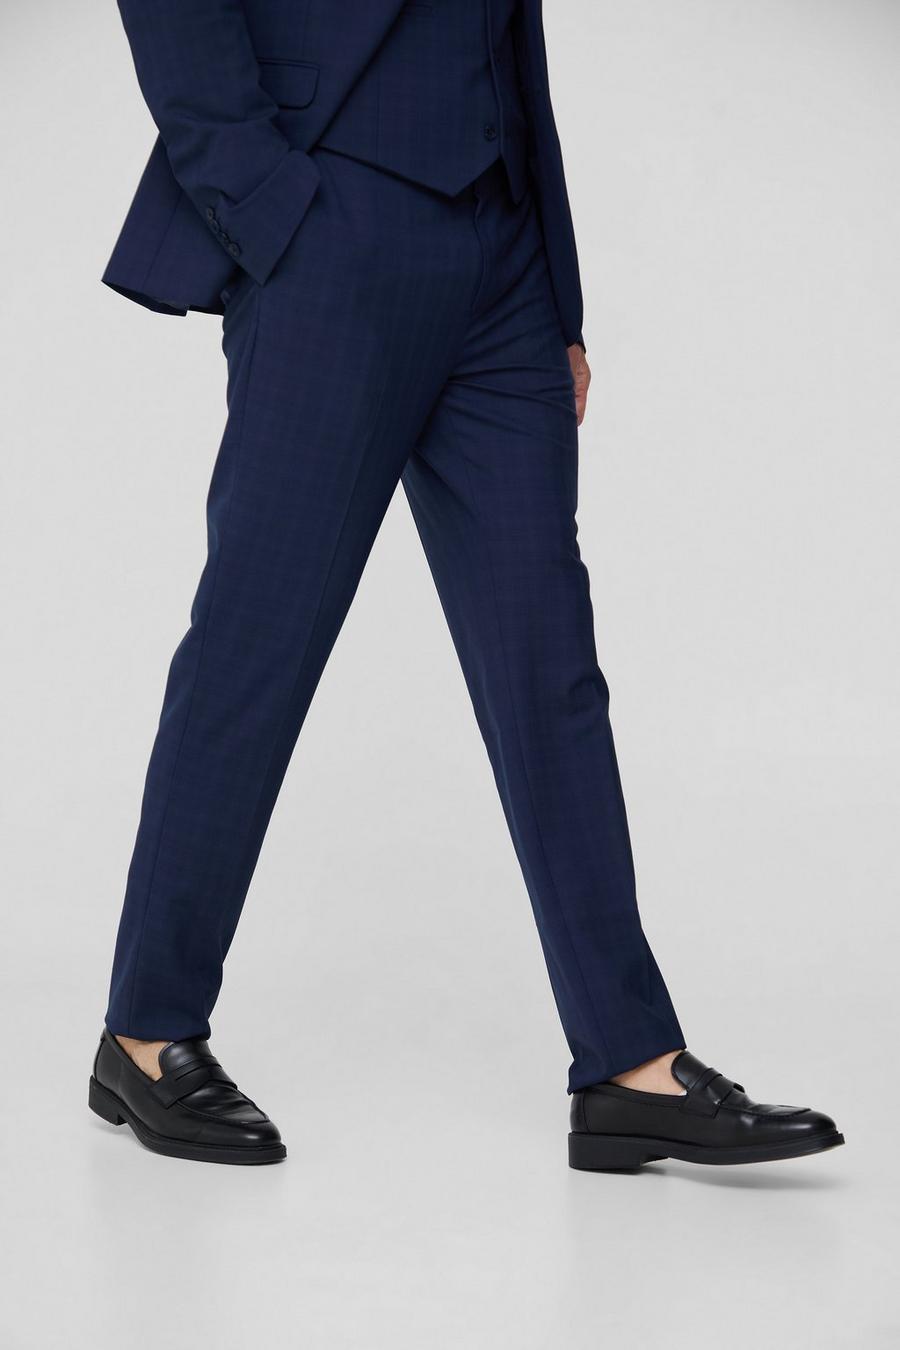 Tall Dark Blue Check Slim Fit Suit Trouser